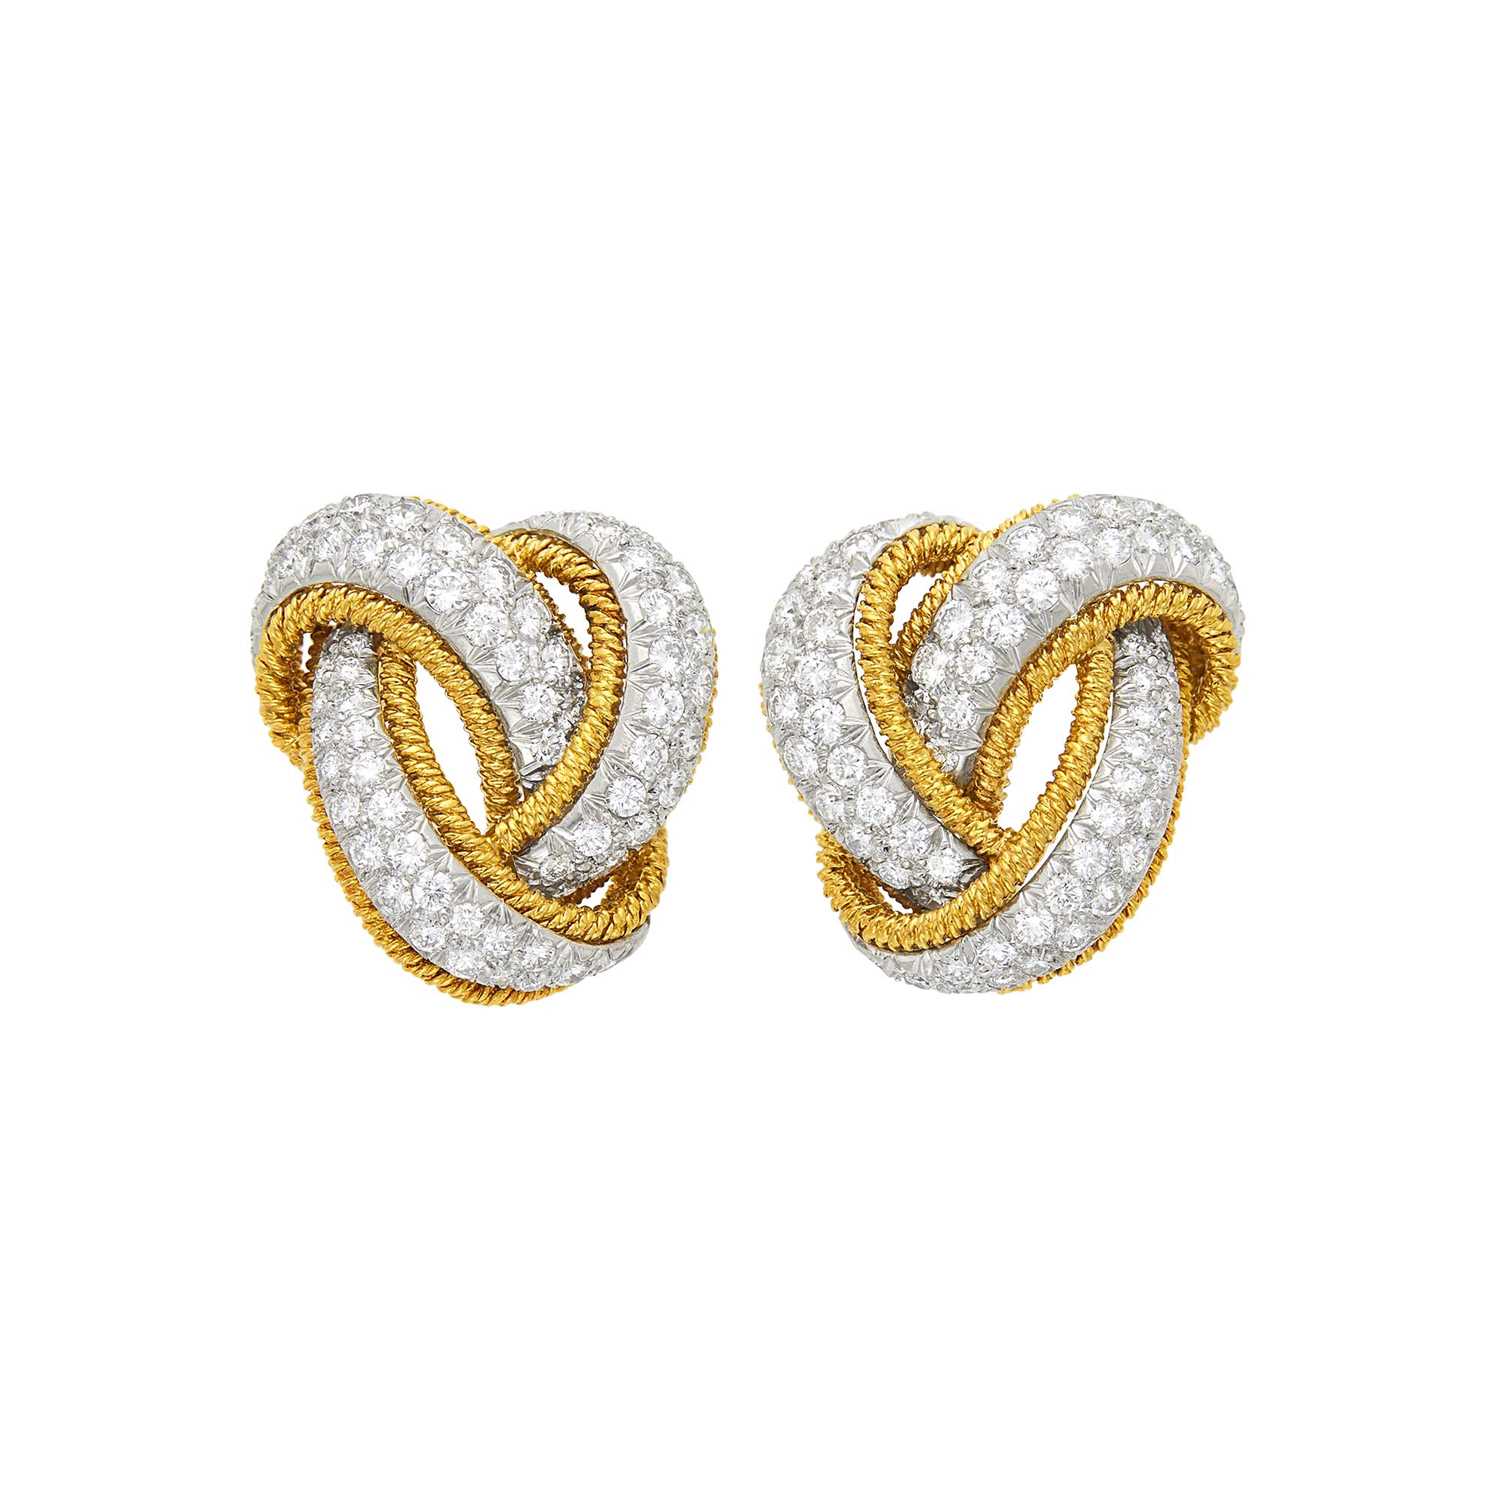 Lot 96 - David Webb Pair of Gold, Platinum and Diamond Knot Earclips